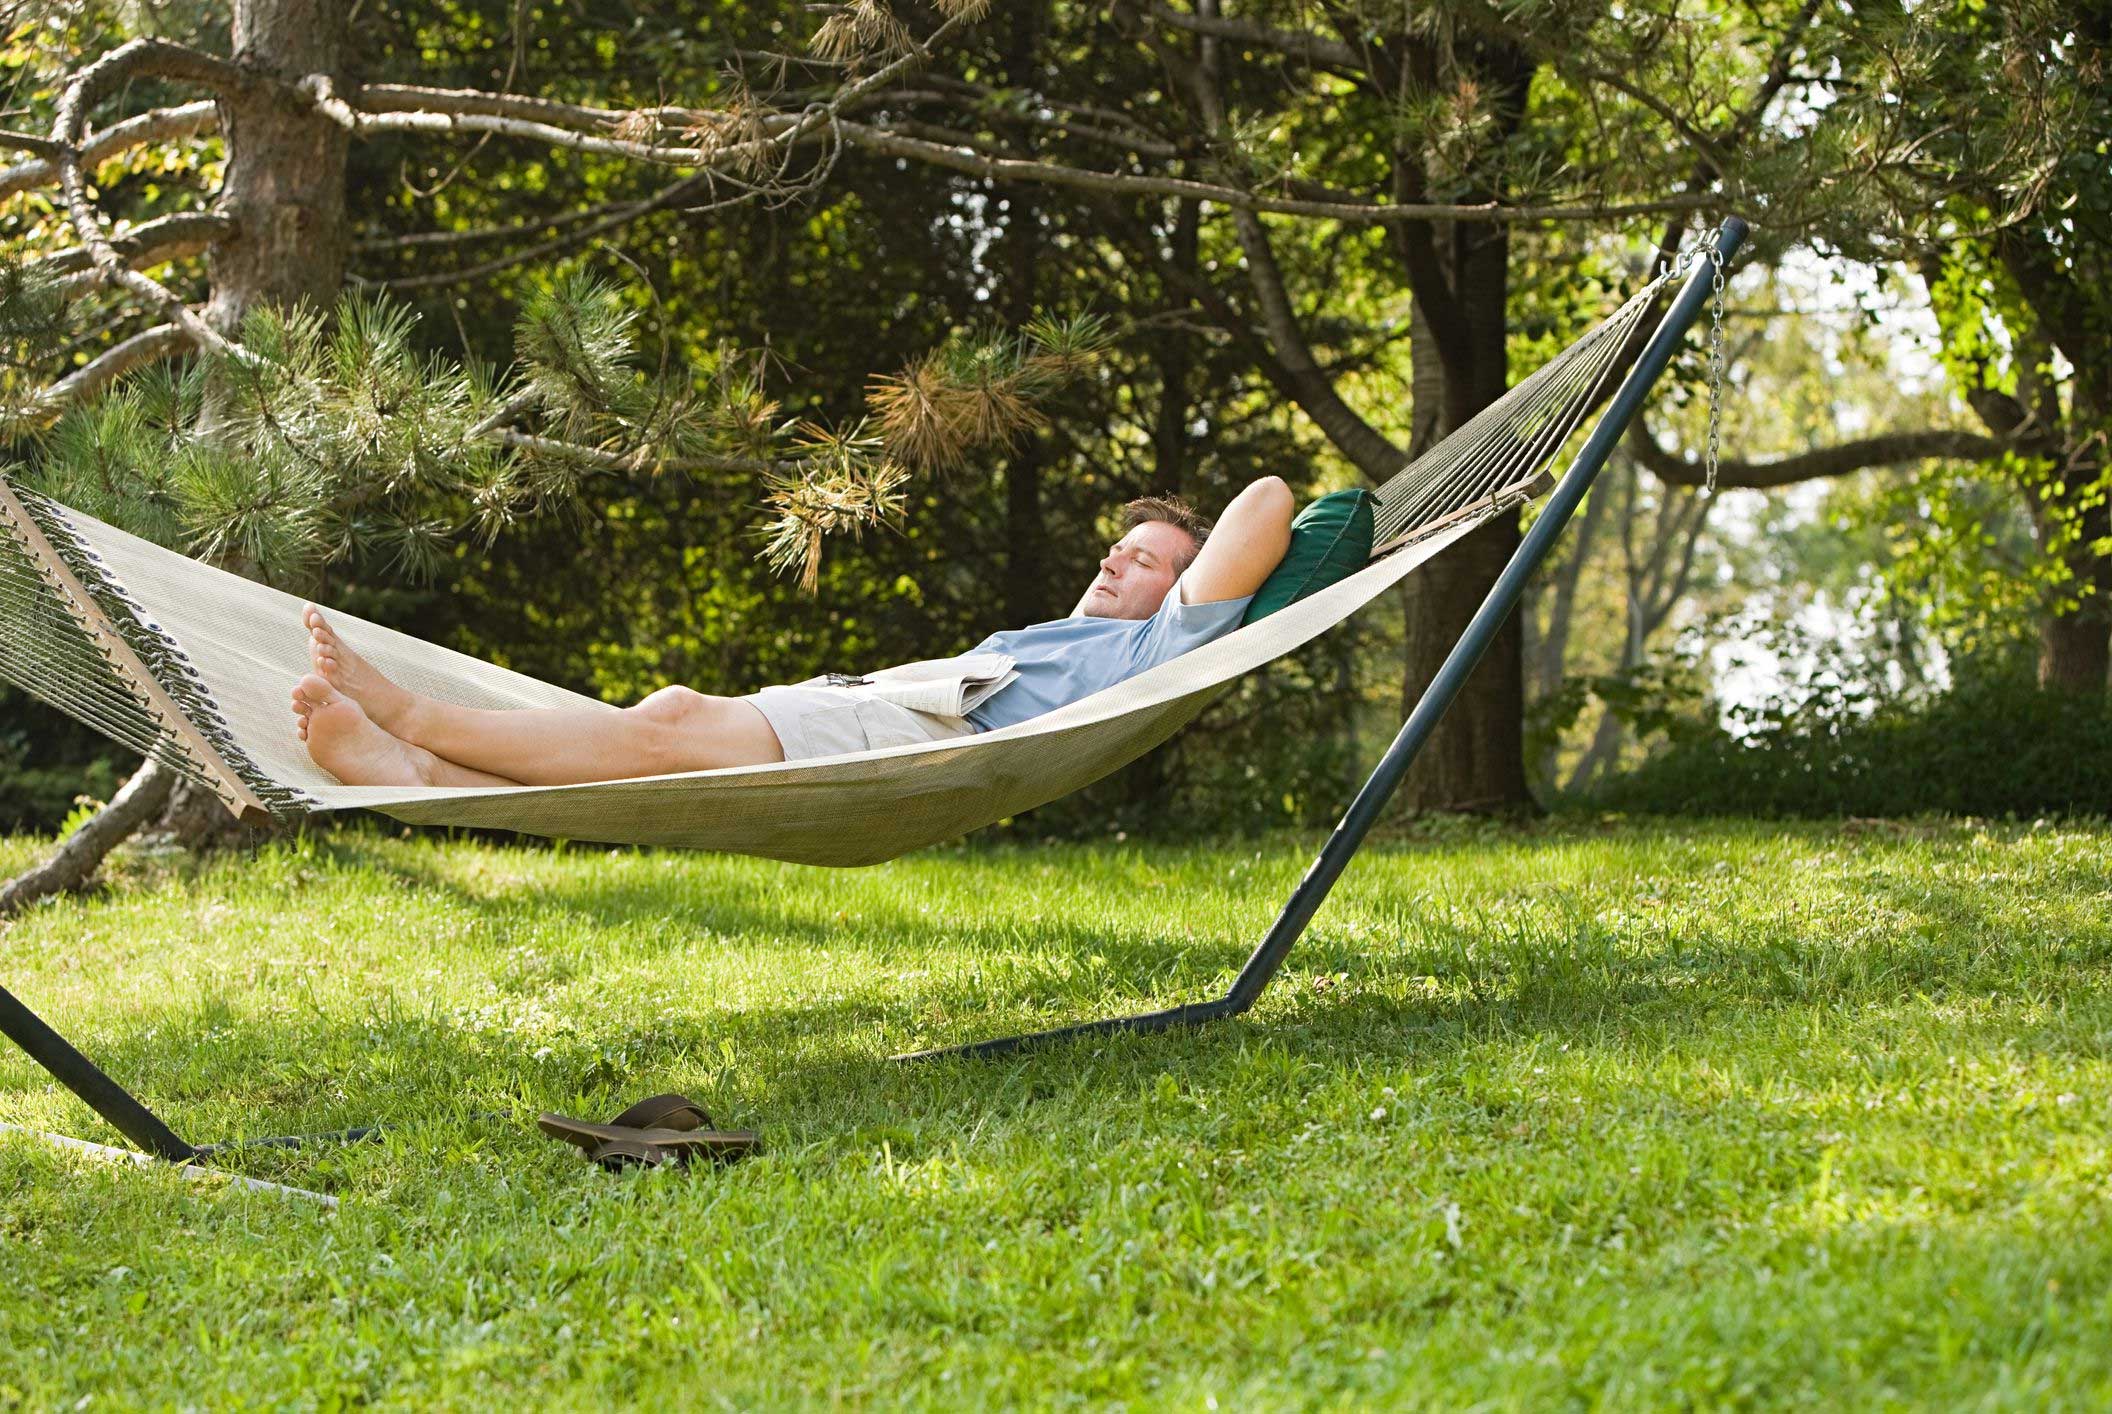 Valuable Self Standing Hammock Buying Guide You Should Know Beforehand | Roy Home Design